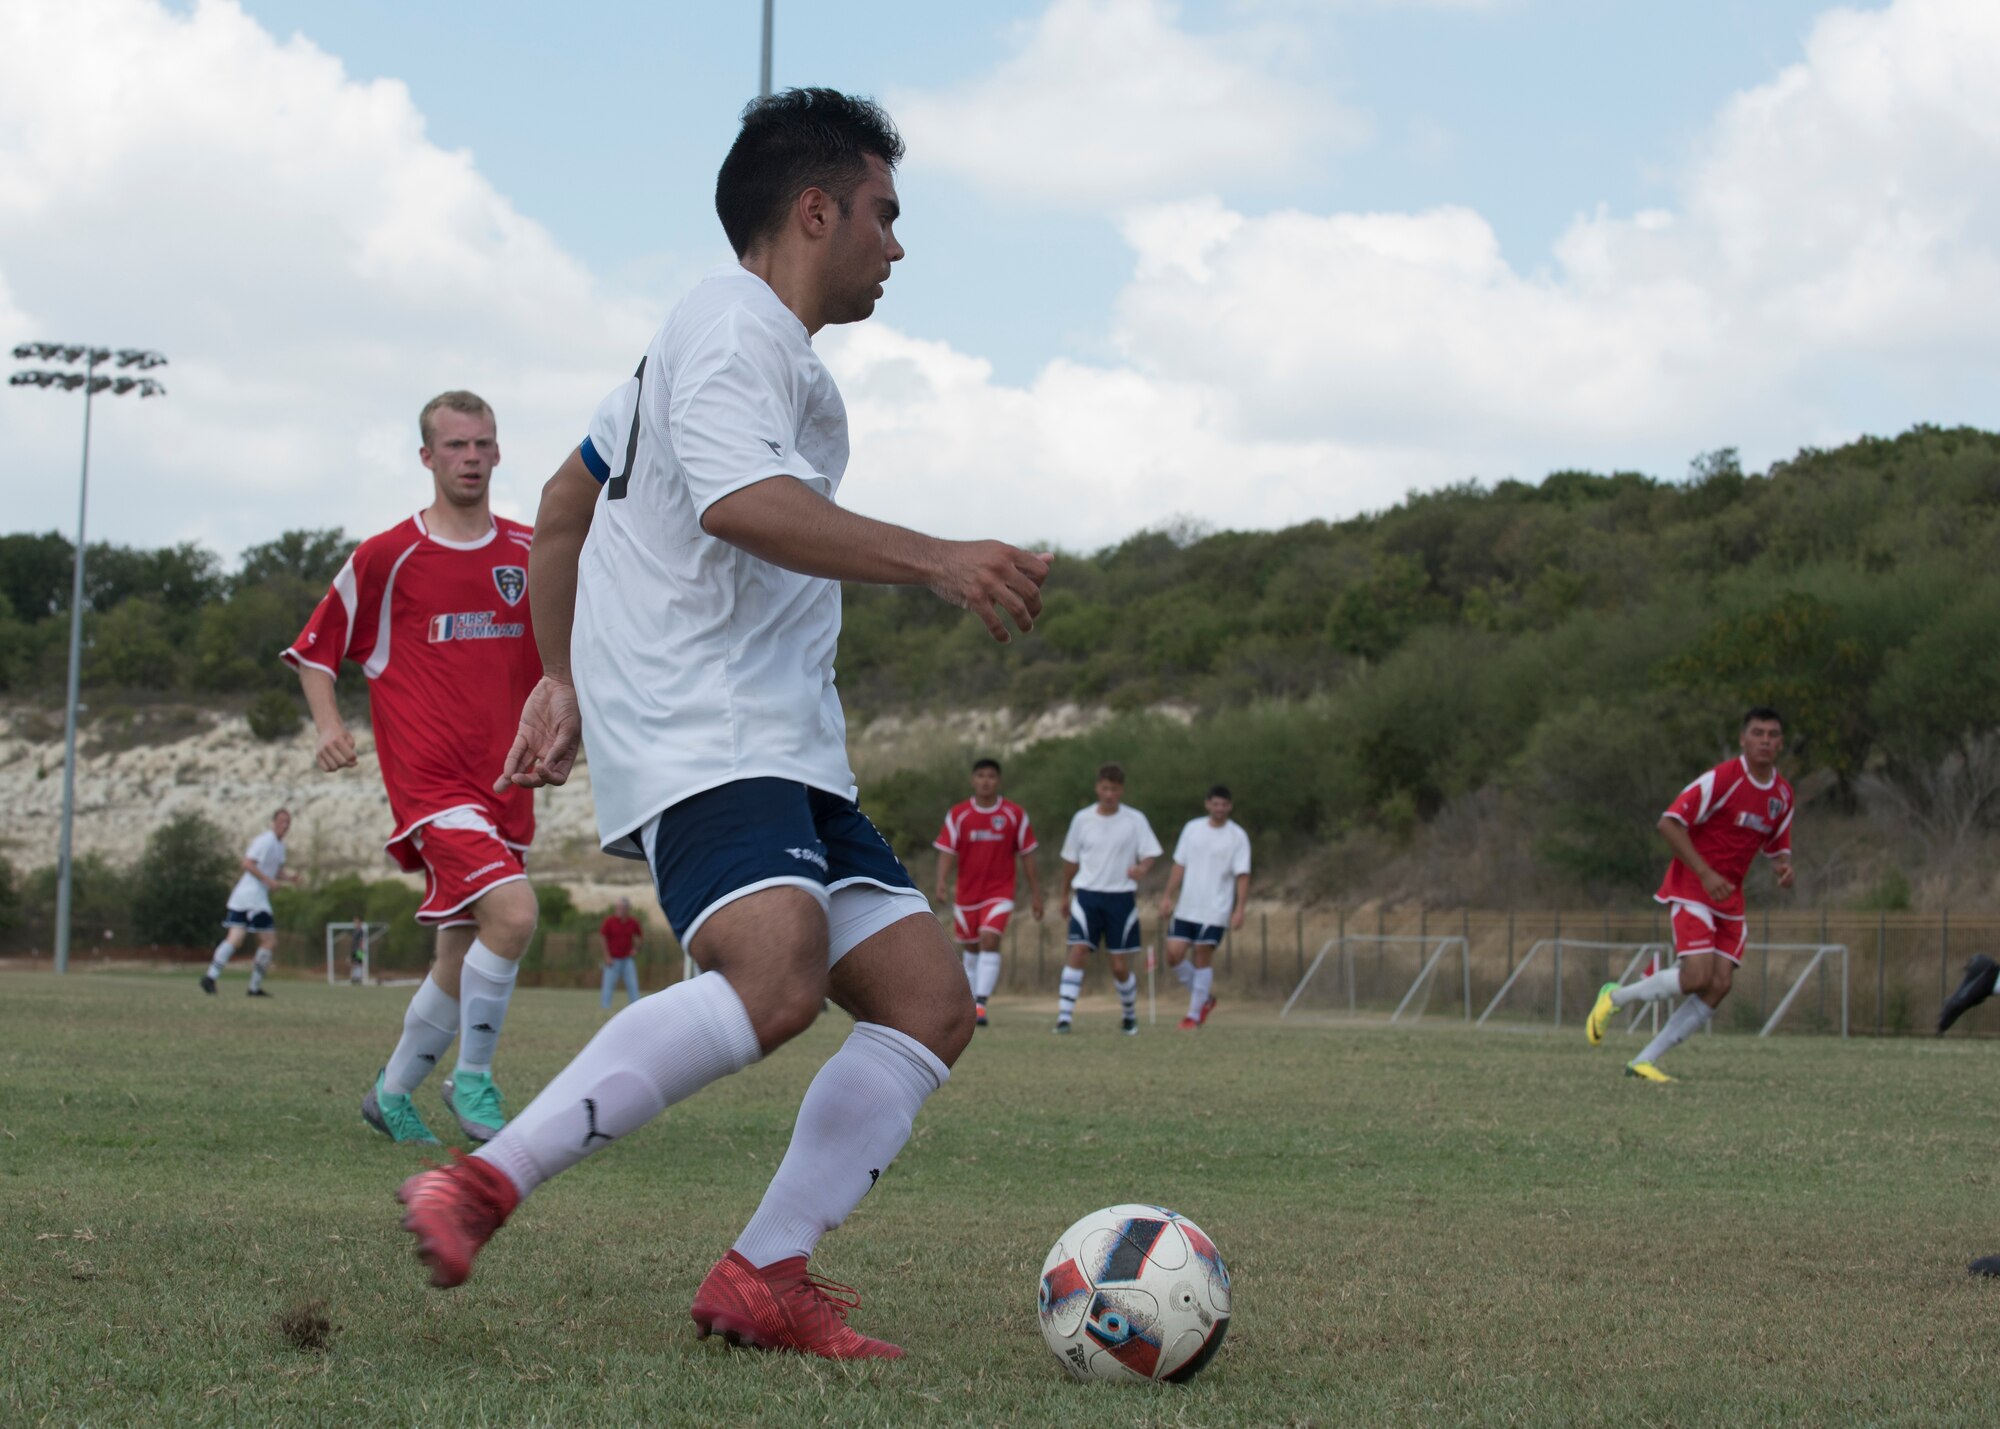 Staff Sgt. Joseph Haug, Holloman's Varsity Soccer Team captain, dribbles the ball Sept. 2, at the South Texas Area Regional Soccer Complex in San Antonio, Texas, during the 2018 Defender's Cup. Haug formerly played for the Air Force Armed Forces Men's Soccer Team. (U.S. Air Force photo by Airman Autumn Vogt)